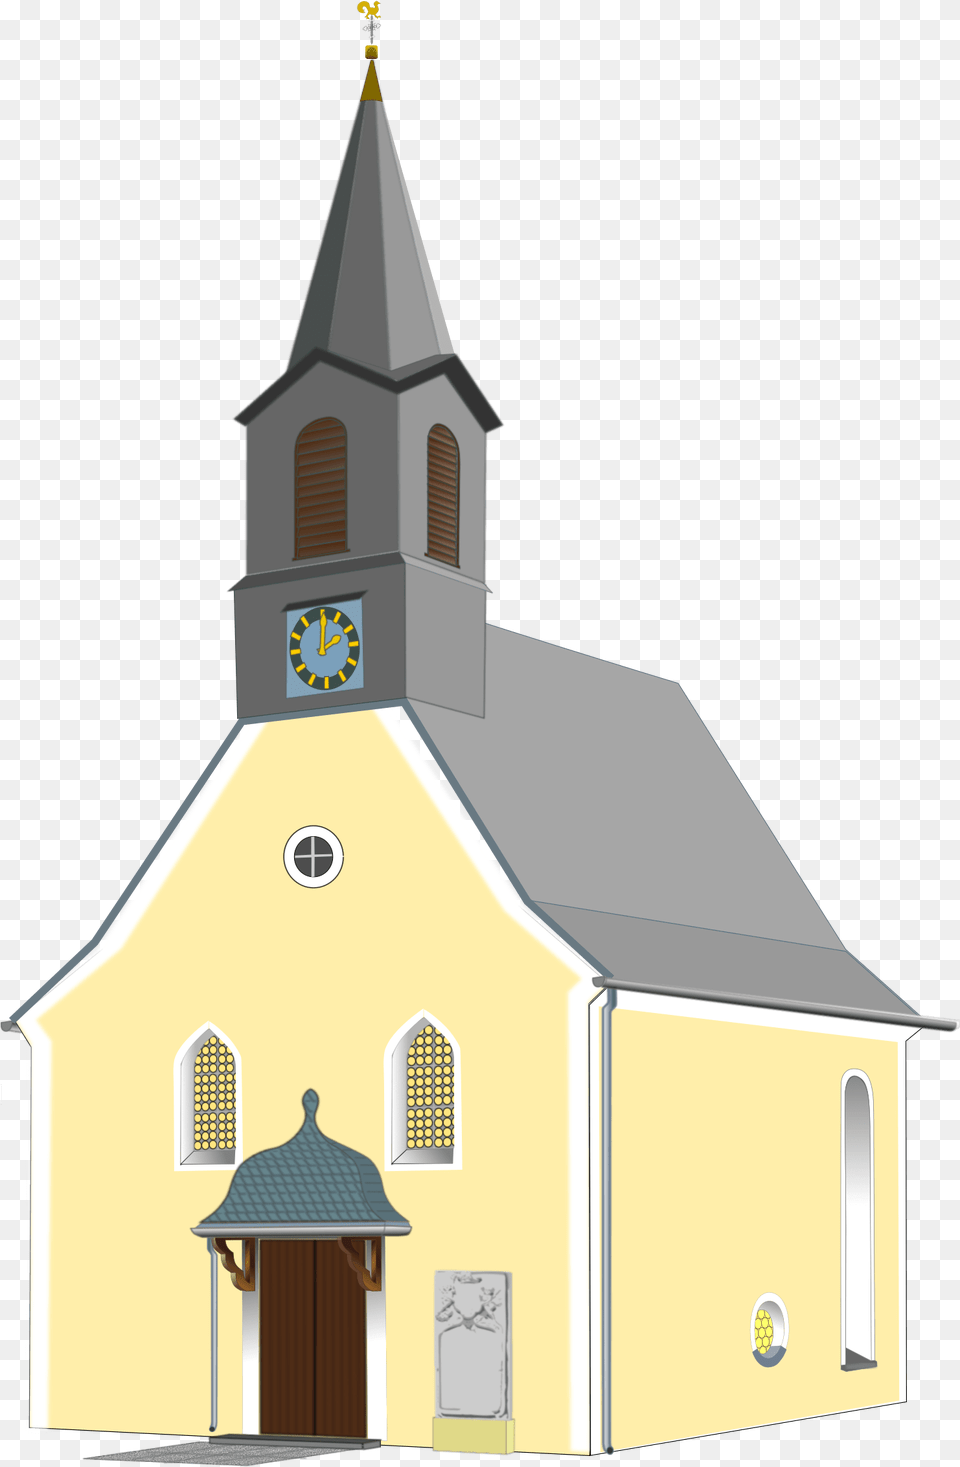 Small Village Stickpng Church Transparent Background, Architecture, Building, Clock Tower, Tower Png